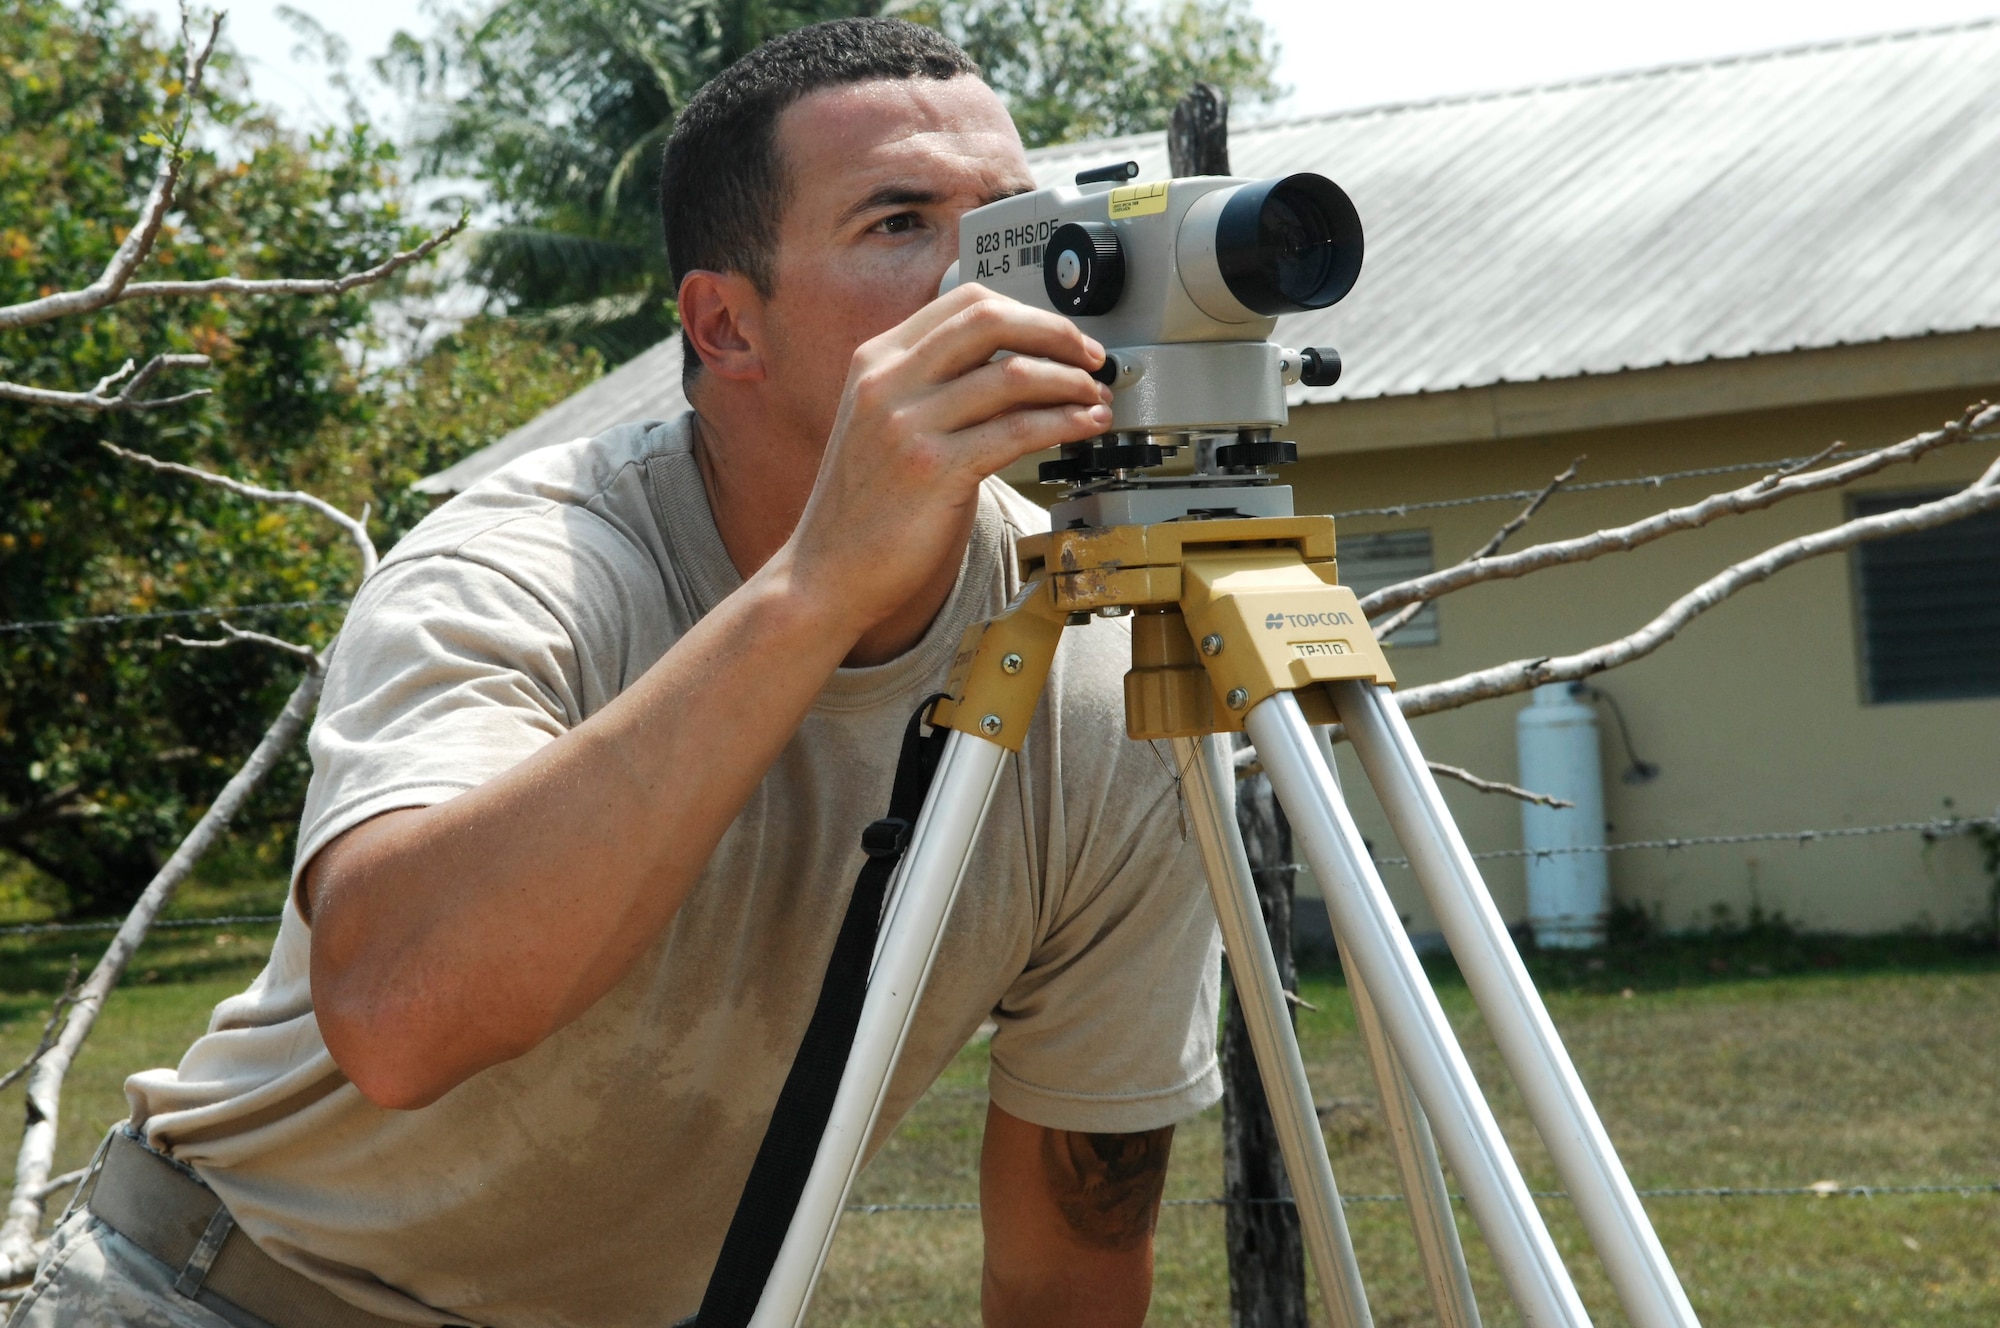 Staff Sgt. Joel Bradley, engineering assistant for the 823rd Red Horse Squadron, sets an auto level to check the final grade elevation at the construction site of the future Crooked Tree Government Primary School March 23, 2013. Civil engineers from both the U.S. and Belize will construct various structures at schools throughout Belize as part of an exercise called New Horizons. (U.S. Air Force photo/Master Sgt. James Law)